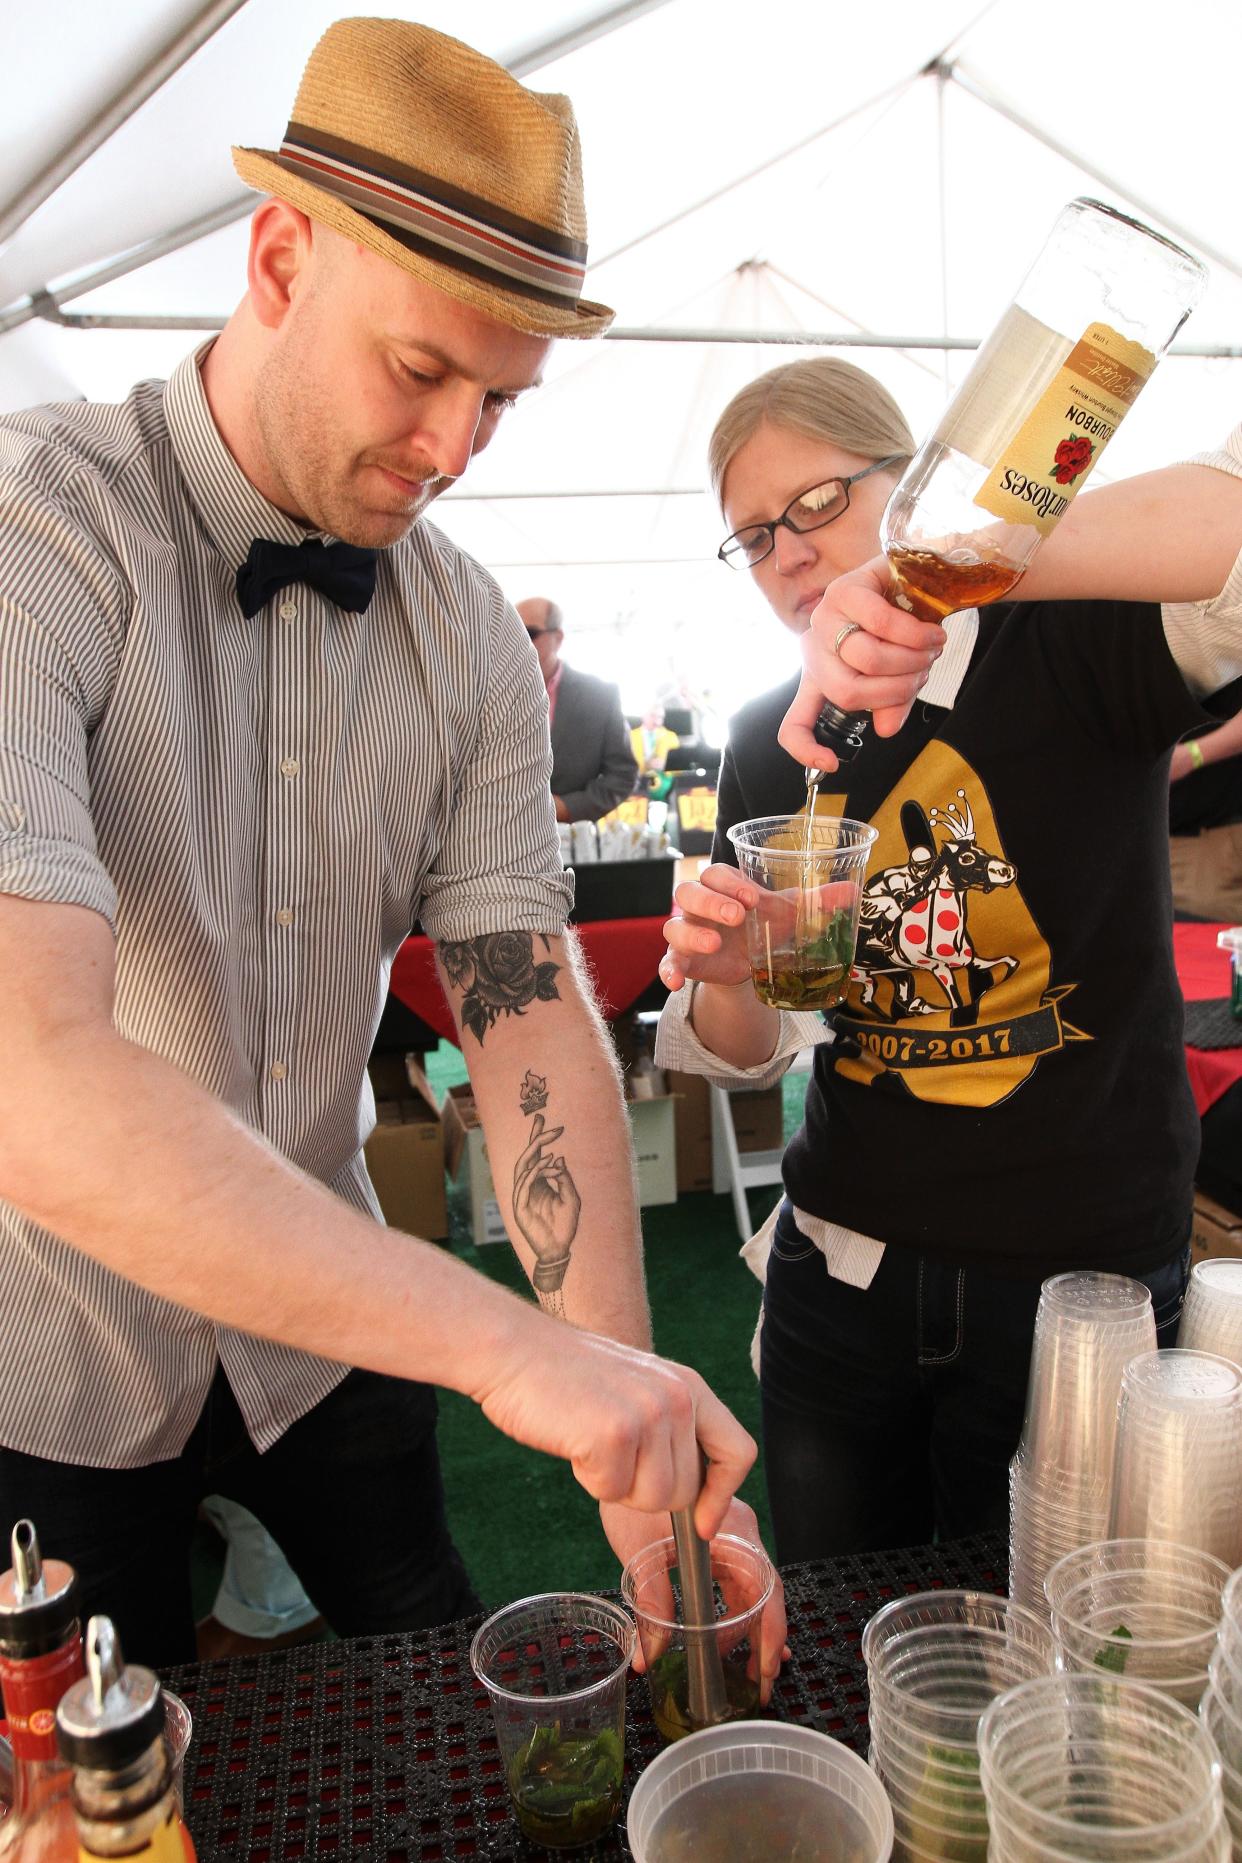 Alex Carroll and Kathryn Ramirez prepare mint julep drinks for waiting customers at Maxie's Derby Day party in 2017.